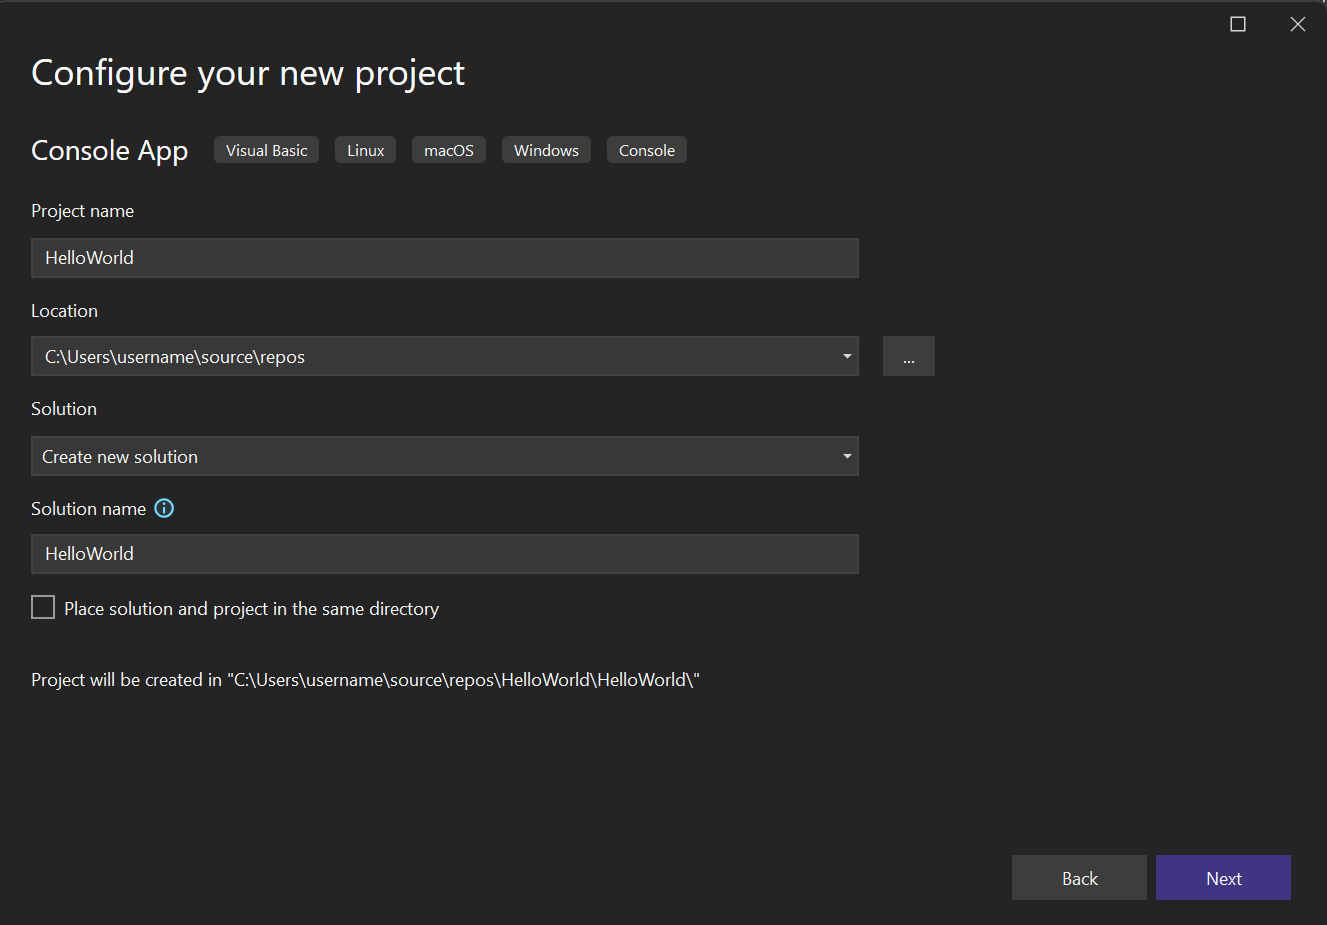 Screenshot of the Configure your new project window with the project name HelloWorld entered.